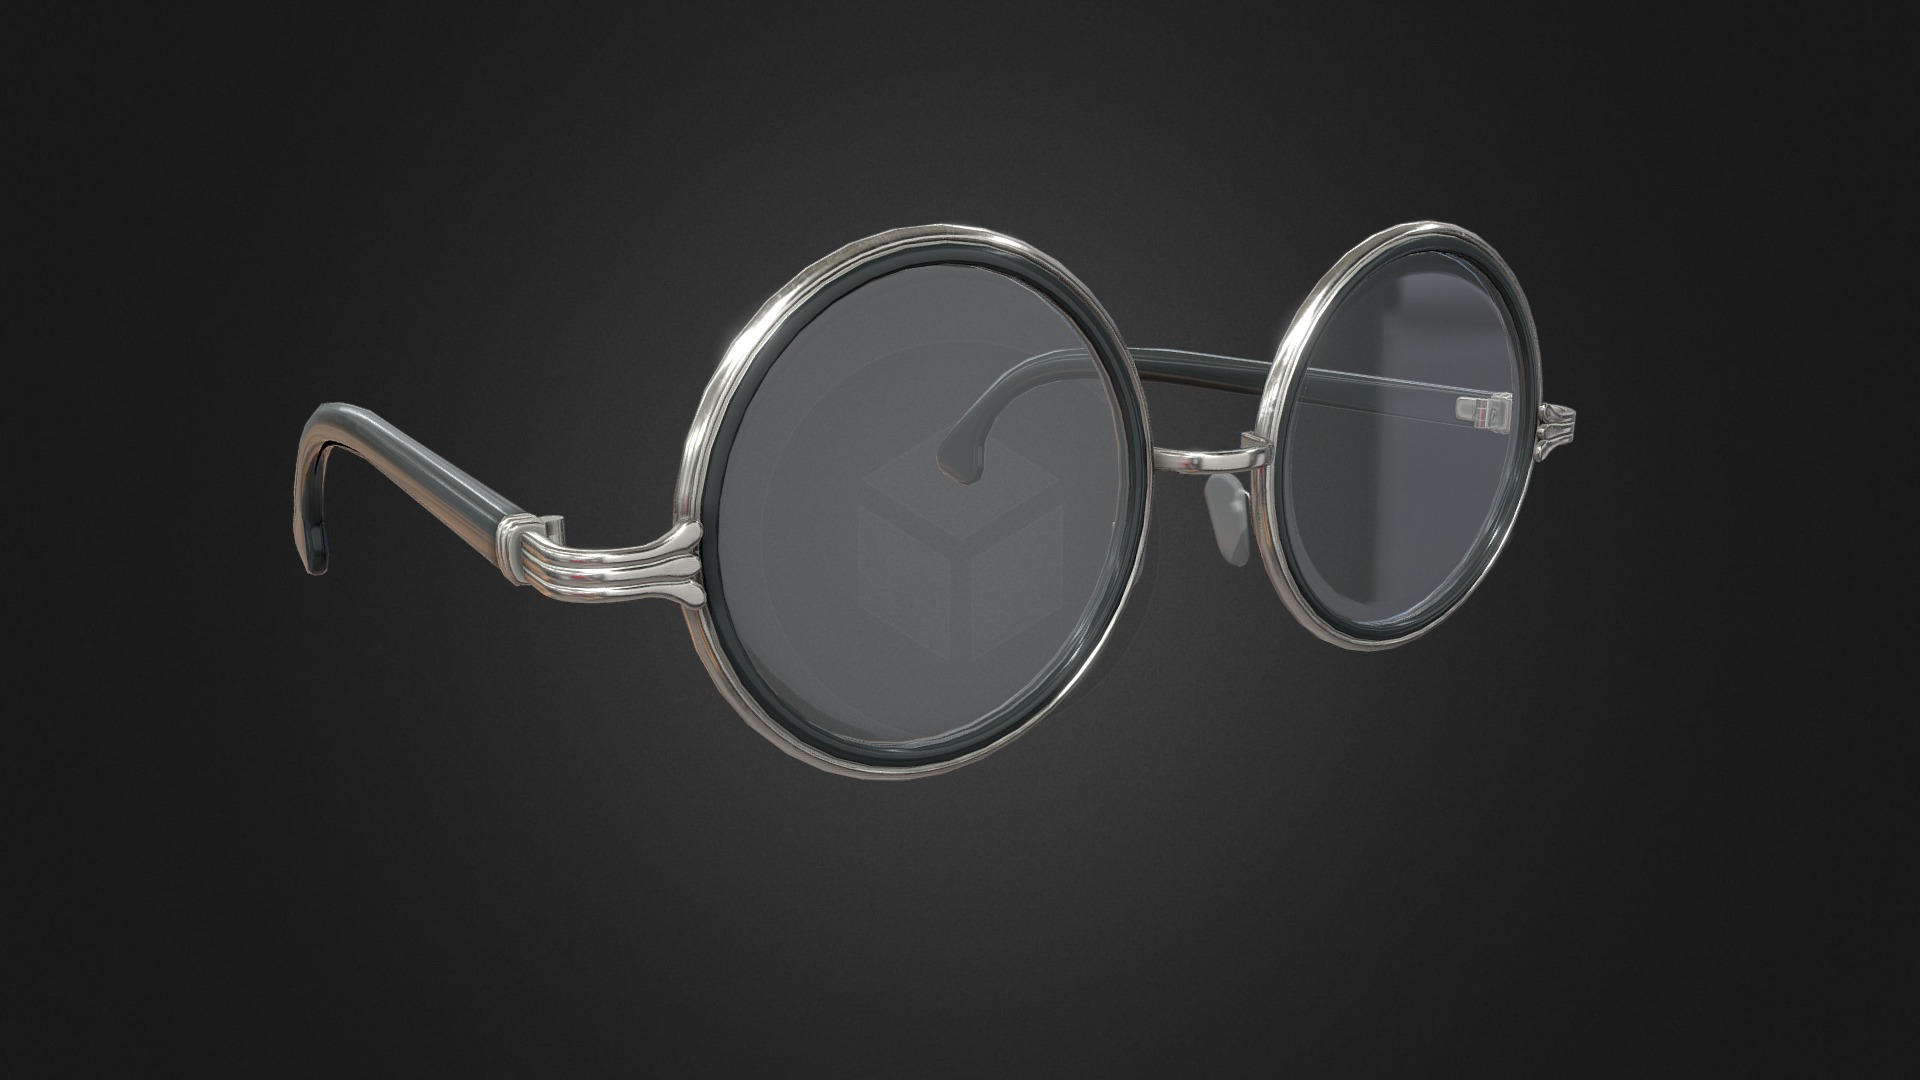 3D model Glasses Metal Frame Retro Classic Vintage Black - This is a 3D model of the Glasses Metal Frame Retro Classic Vintage Black. The 3D model is about a pair of glasses.